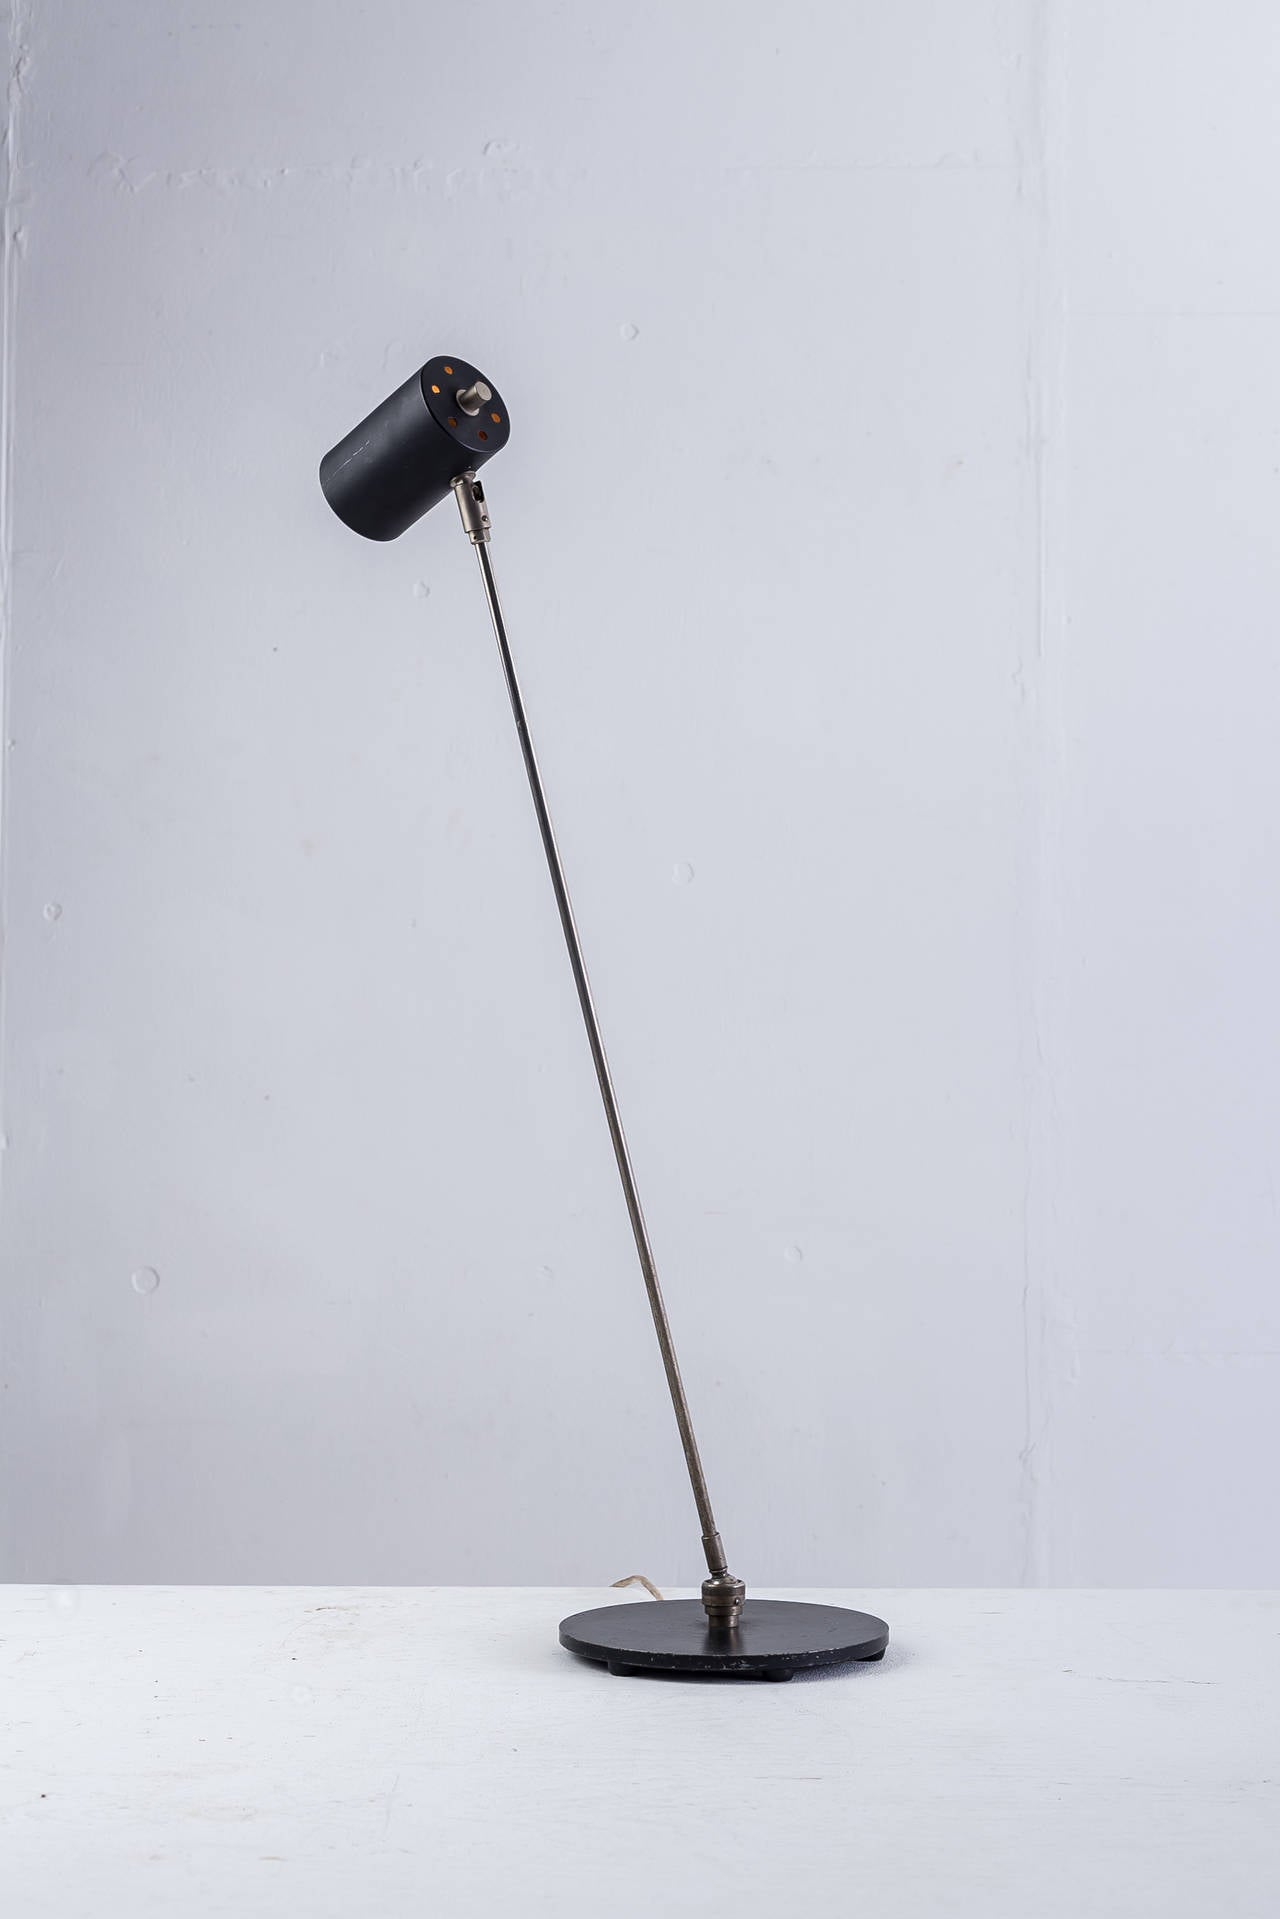 A modernist floor lamp from the 1950s, made of a black lacquered metal base and cylindrical shade on a brass stem. The ball-joint construction at the bottom of the stem makes the lamp adjustable at a 360 degree angle. The angle of the hood is also